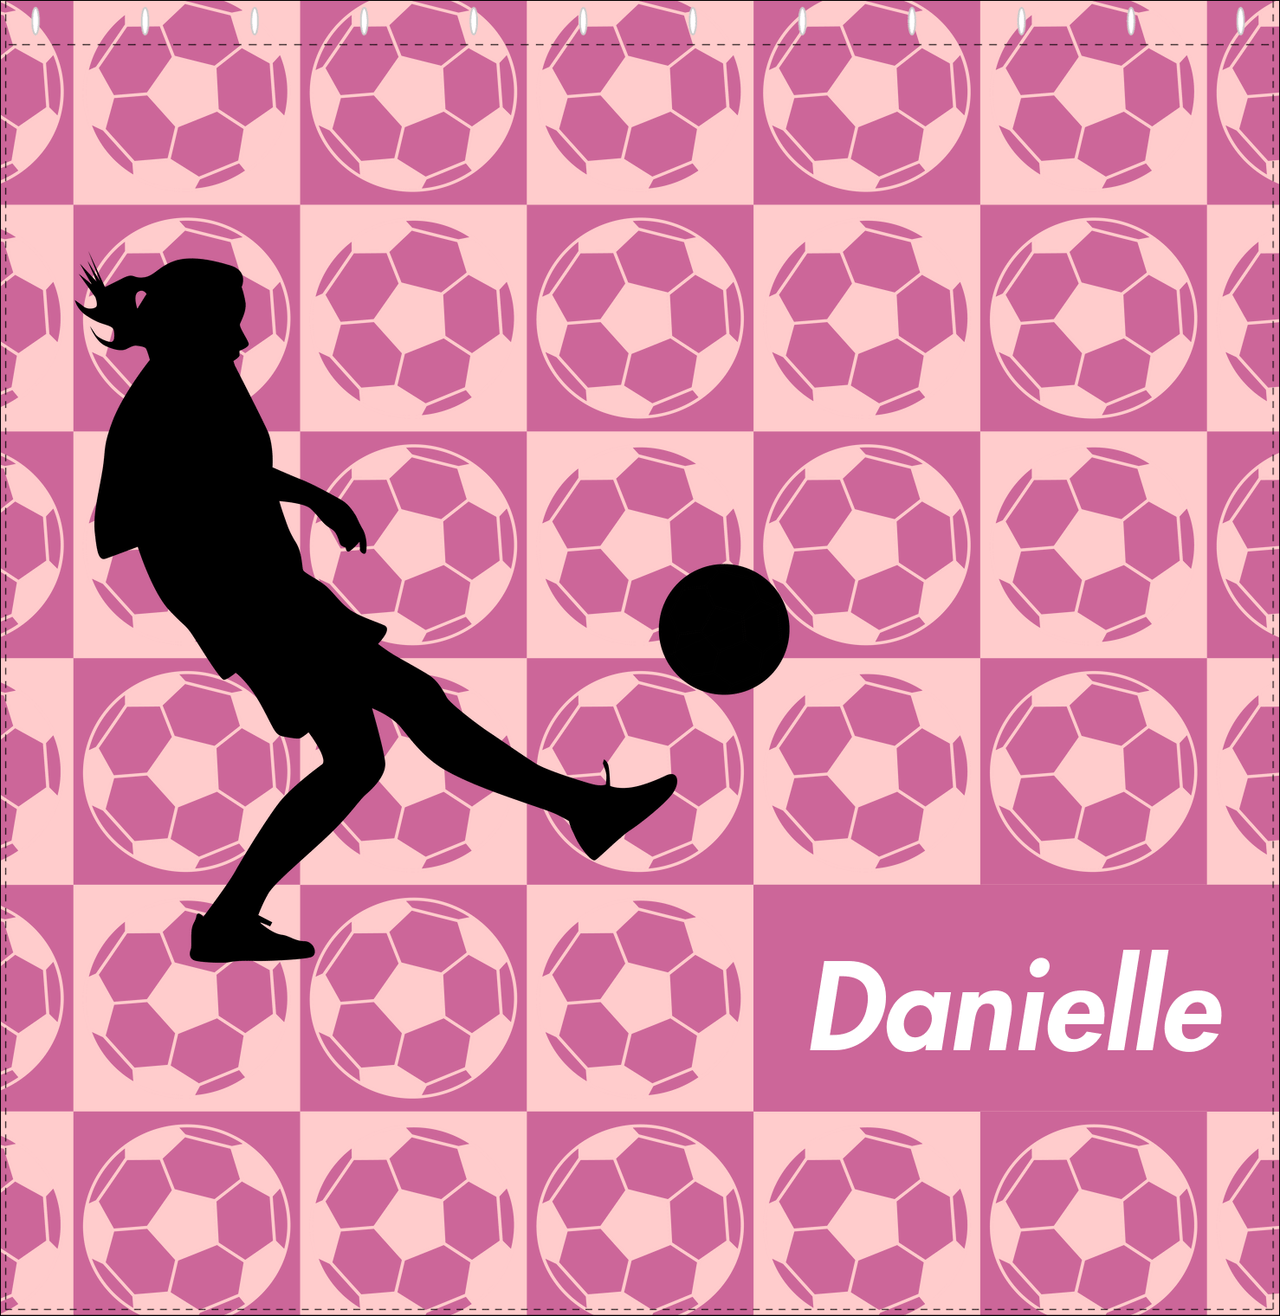 Personalized Soccer Shower Curtain XLV - Pink Background - Girl Silhouette VI - Decorate View